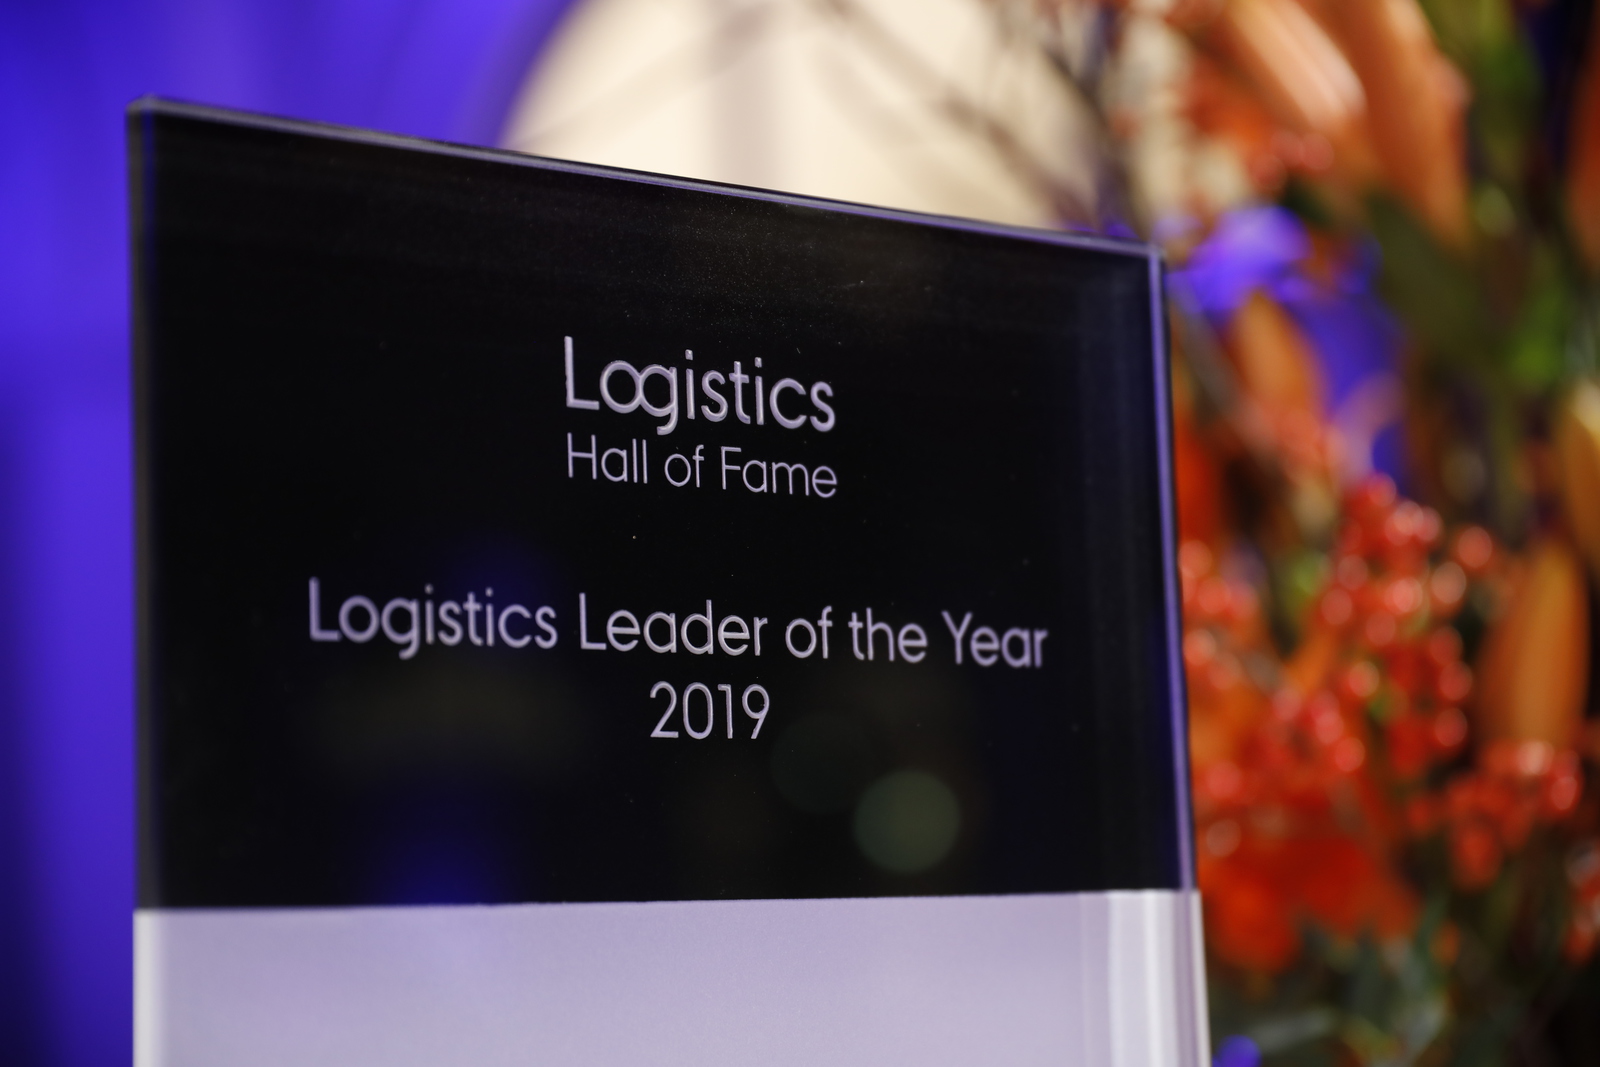 Logistics Hall of Fame: Deadline for proposals is May 8th